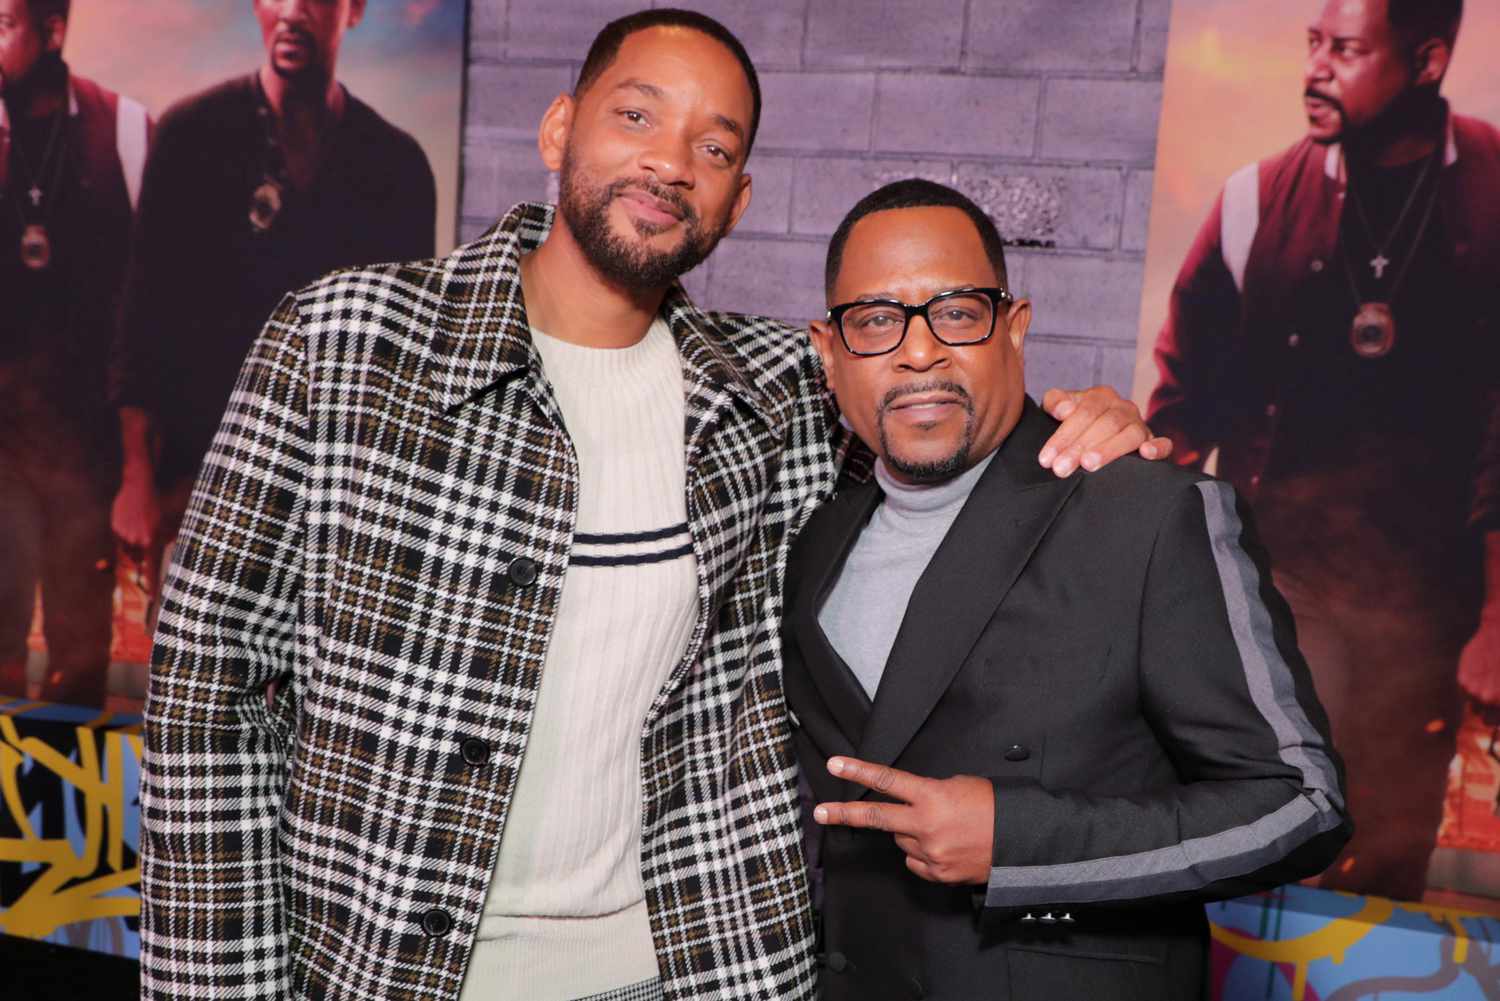 WILL SMITH HYPES ‘BAD BOYS 4’ EXCITEMENT AS HE REVEALS FILMING HAS WRAPPED UP